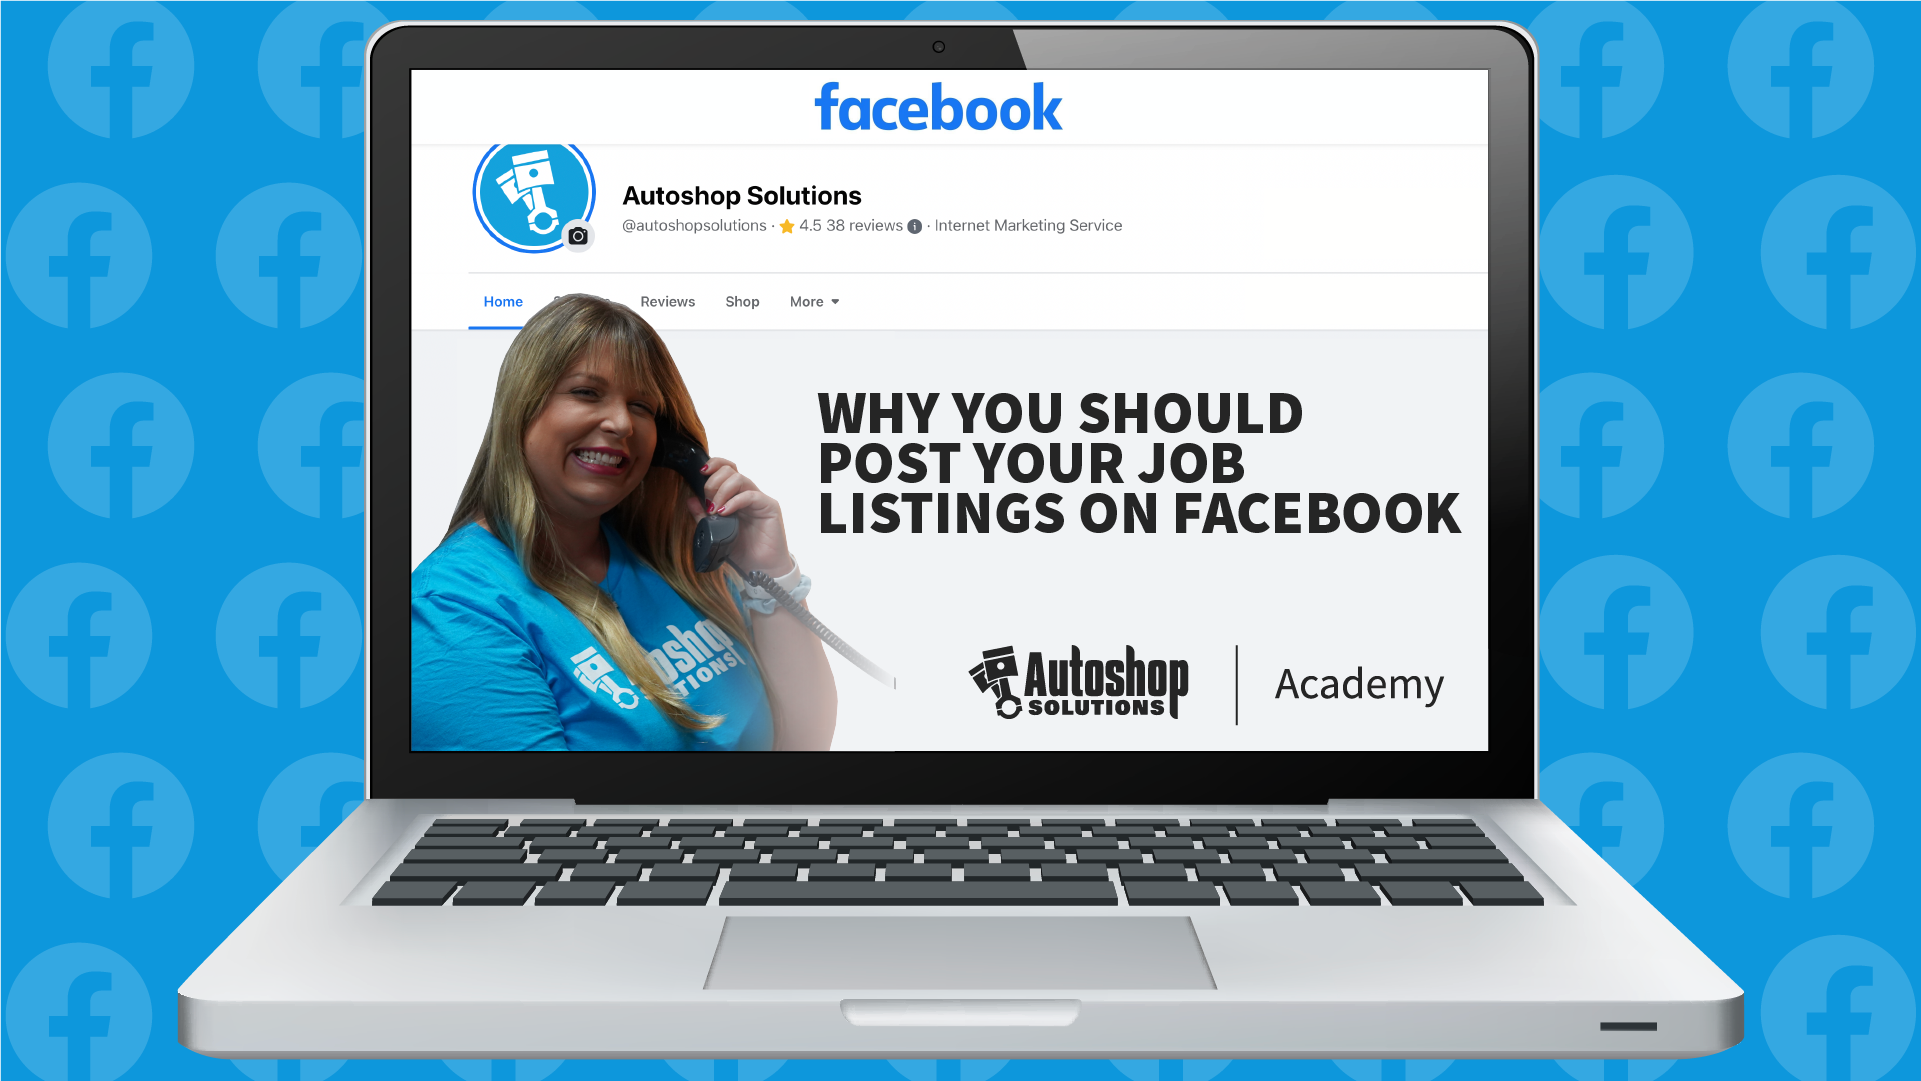 Why You Should Post Your Job Listings on Facebook